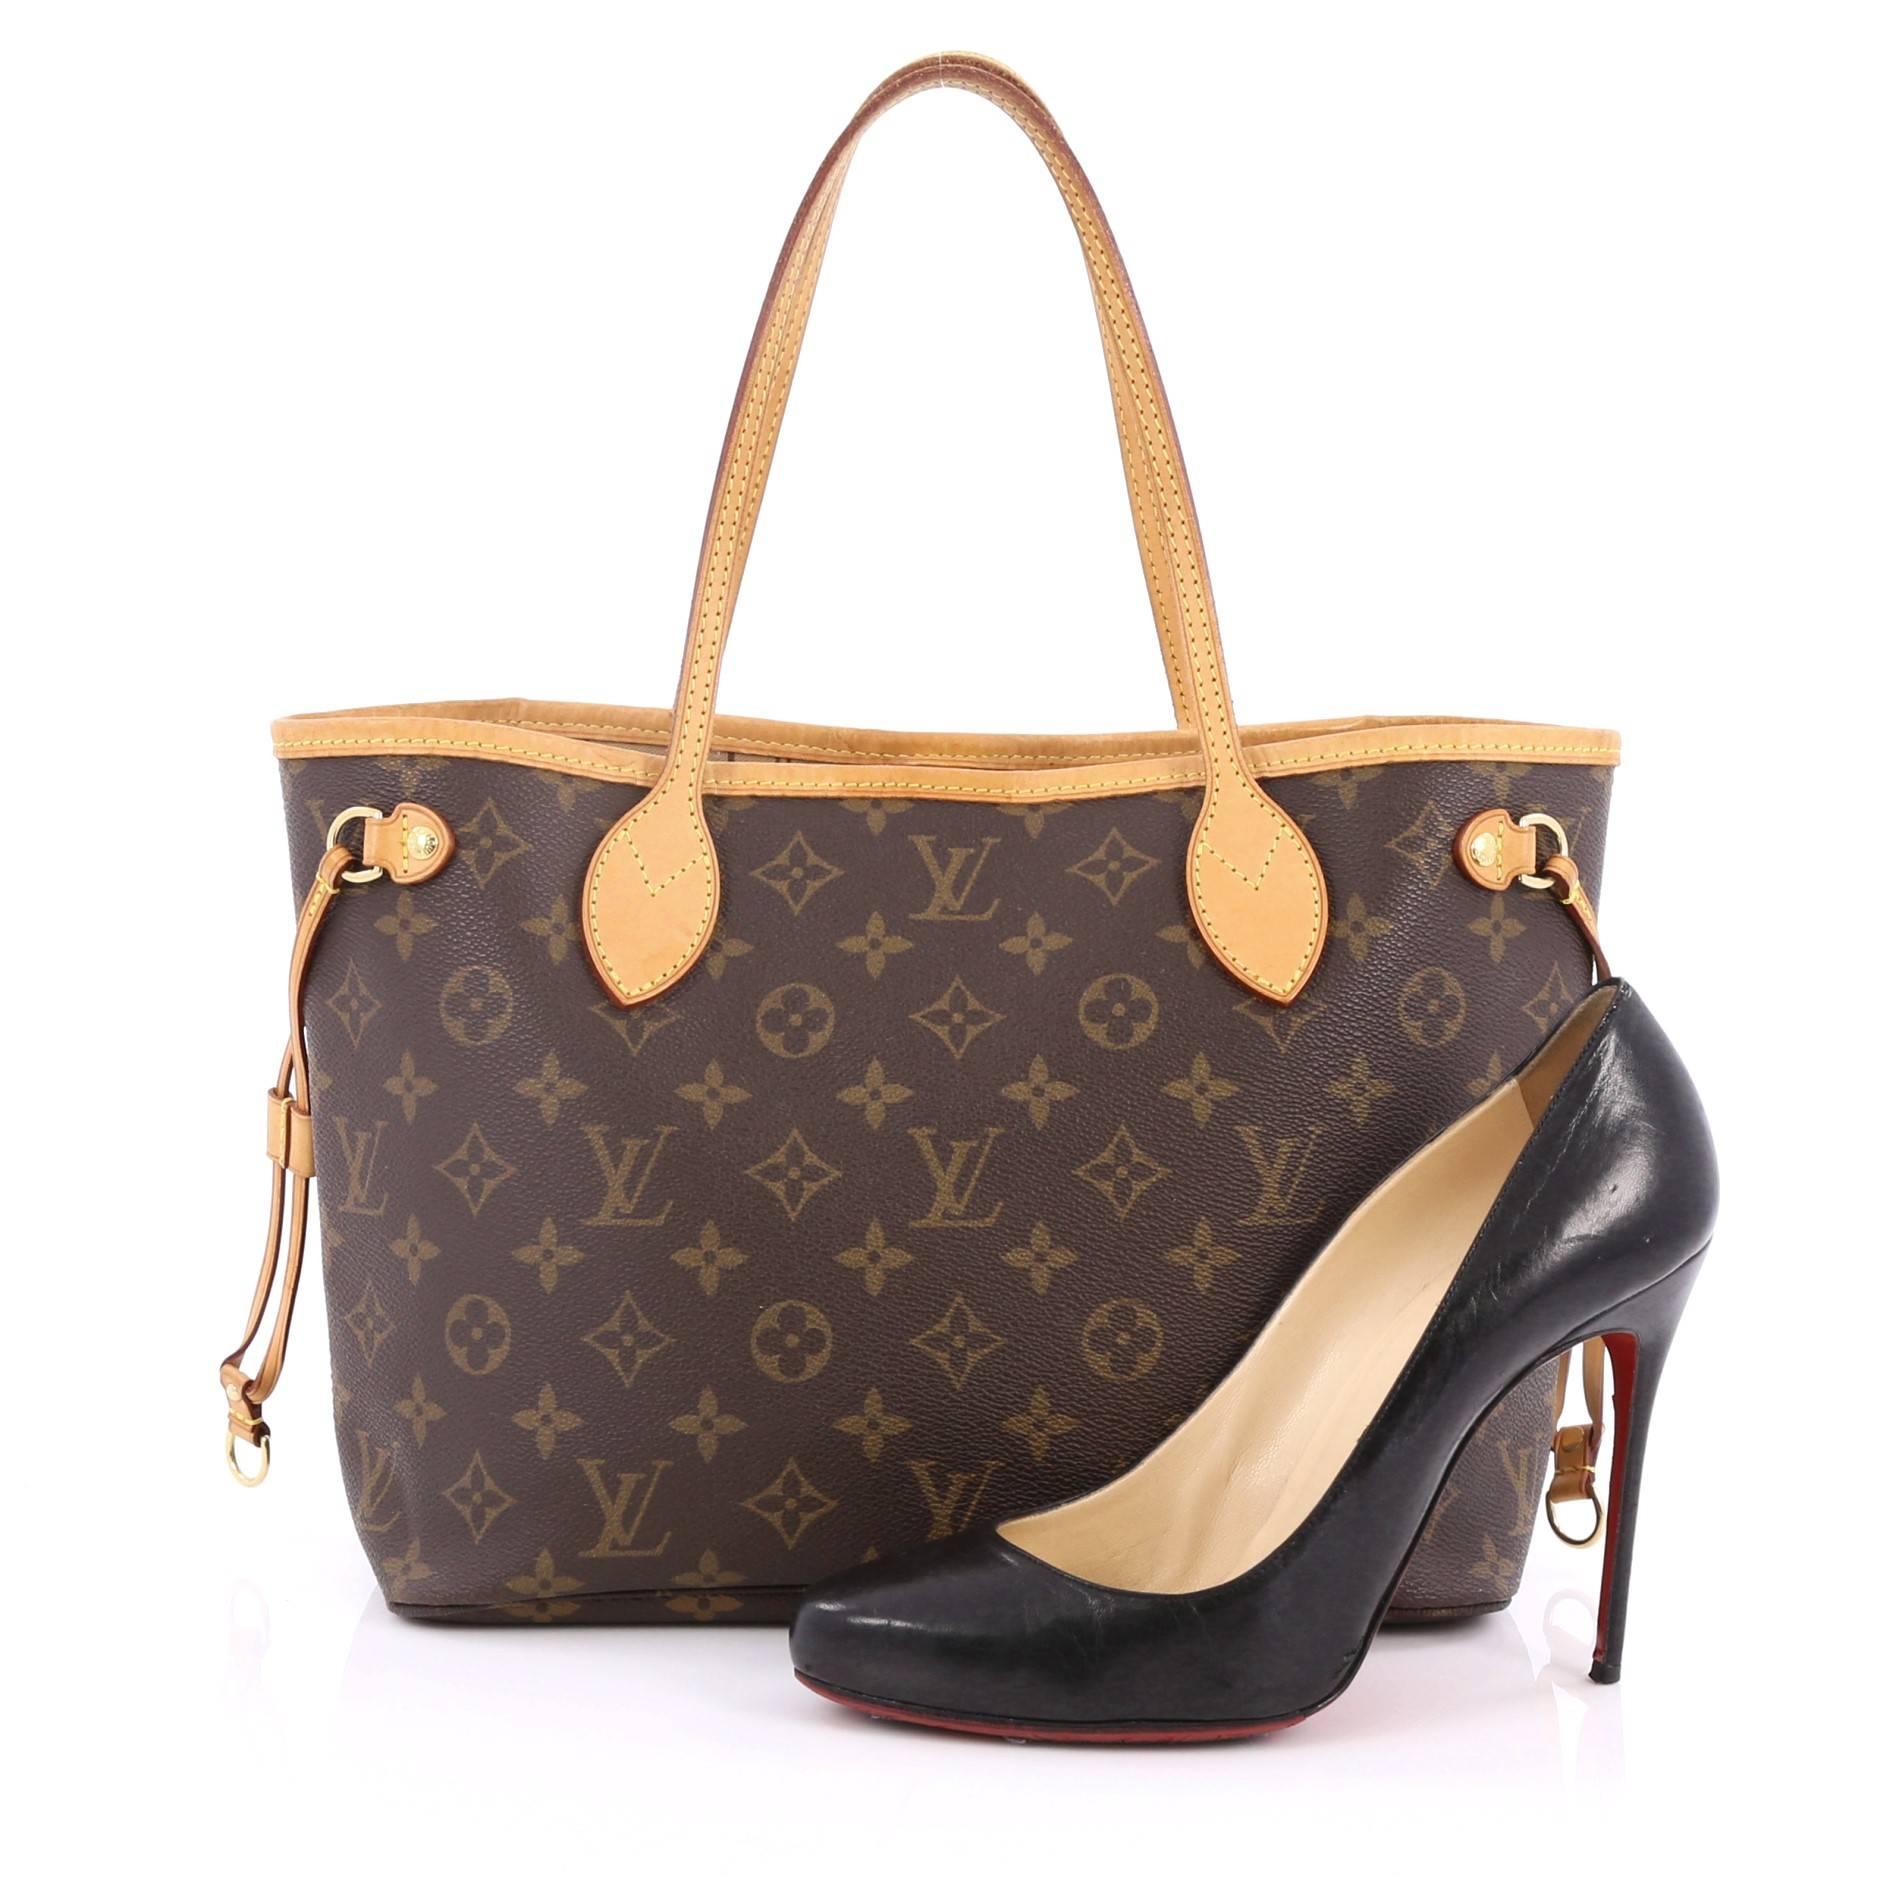 This authentic Louis Vuitton Neverfull Tote Monogram Canvas PM is spacious and structured which makes it a popular and practical tote beloved by many. Constructed from Louis Vuitton's signature brown monogram coated canvas, the tote features natural